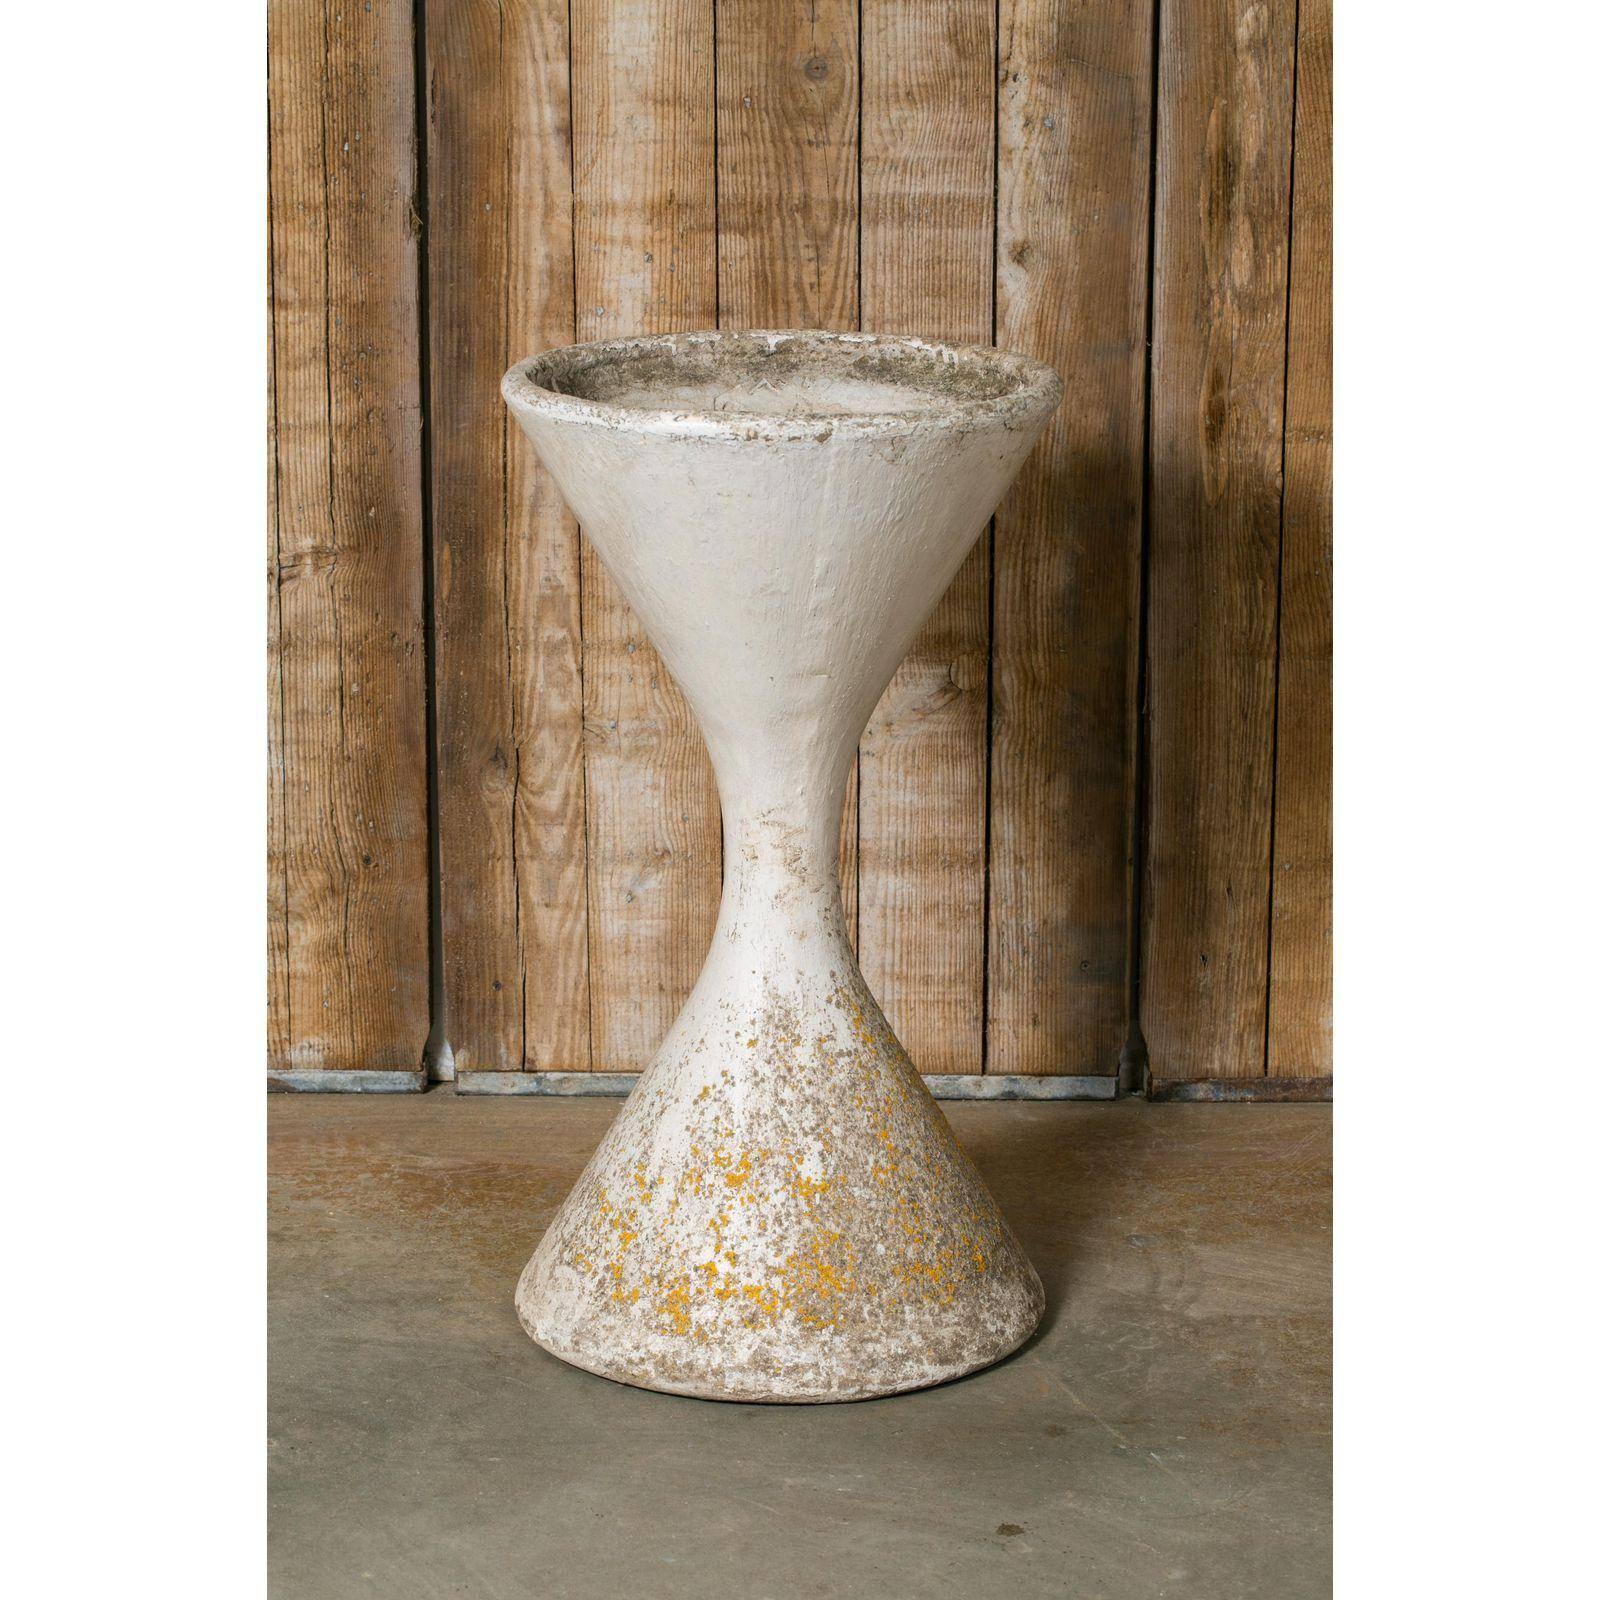 Wonderful vintage Willy Guhl Spindle or Diablo style planter from Swiss company Eternit Ag, circa 1950's. Has white paint on the exterior with orange lichen and is constructed of fiber cement. Great Mid-Century Modern hourglass geometric design.